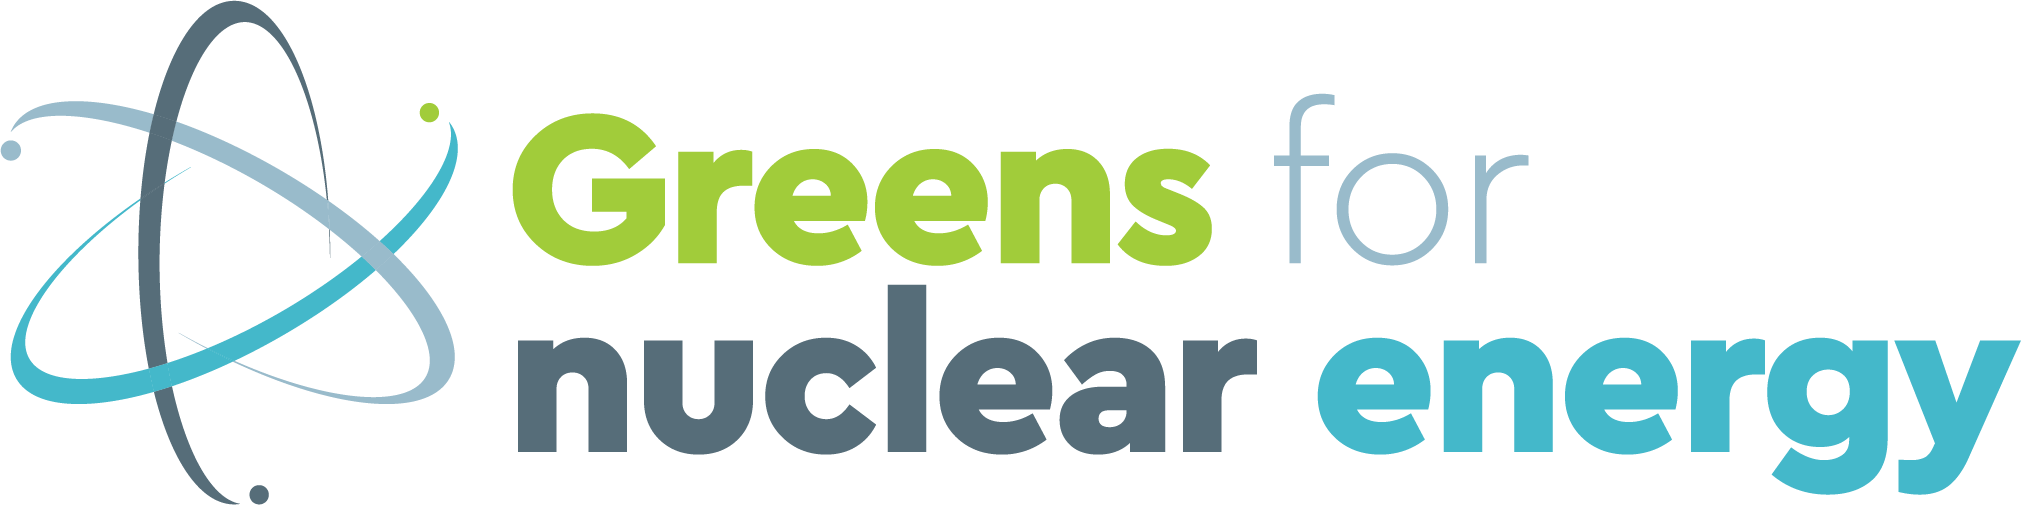 Greens for nuclear energy